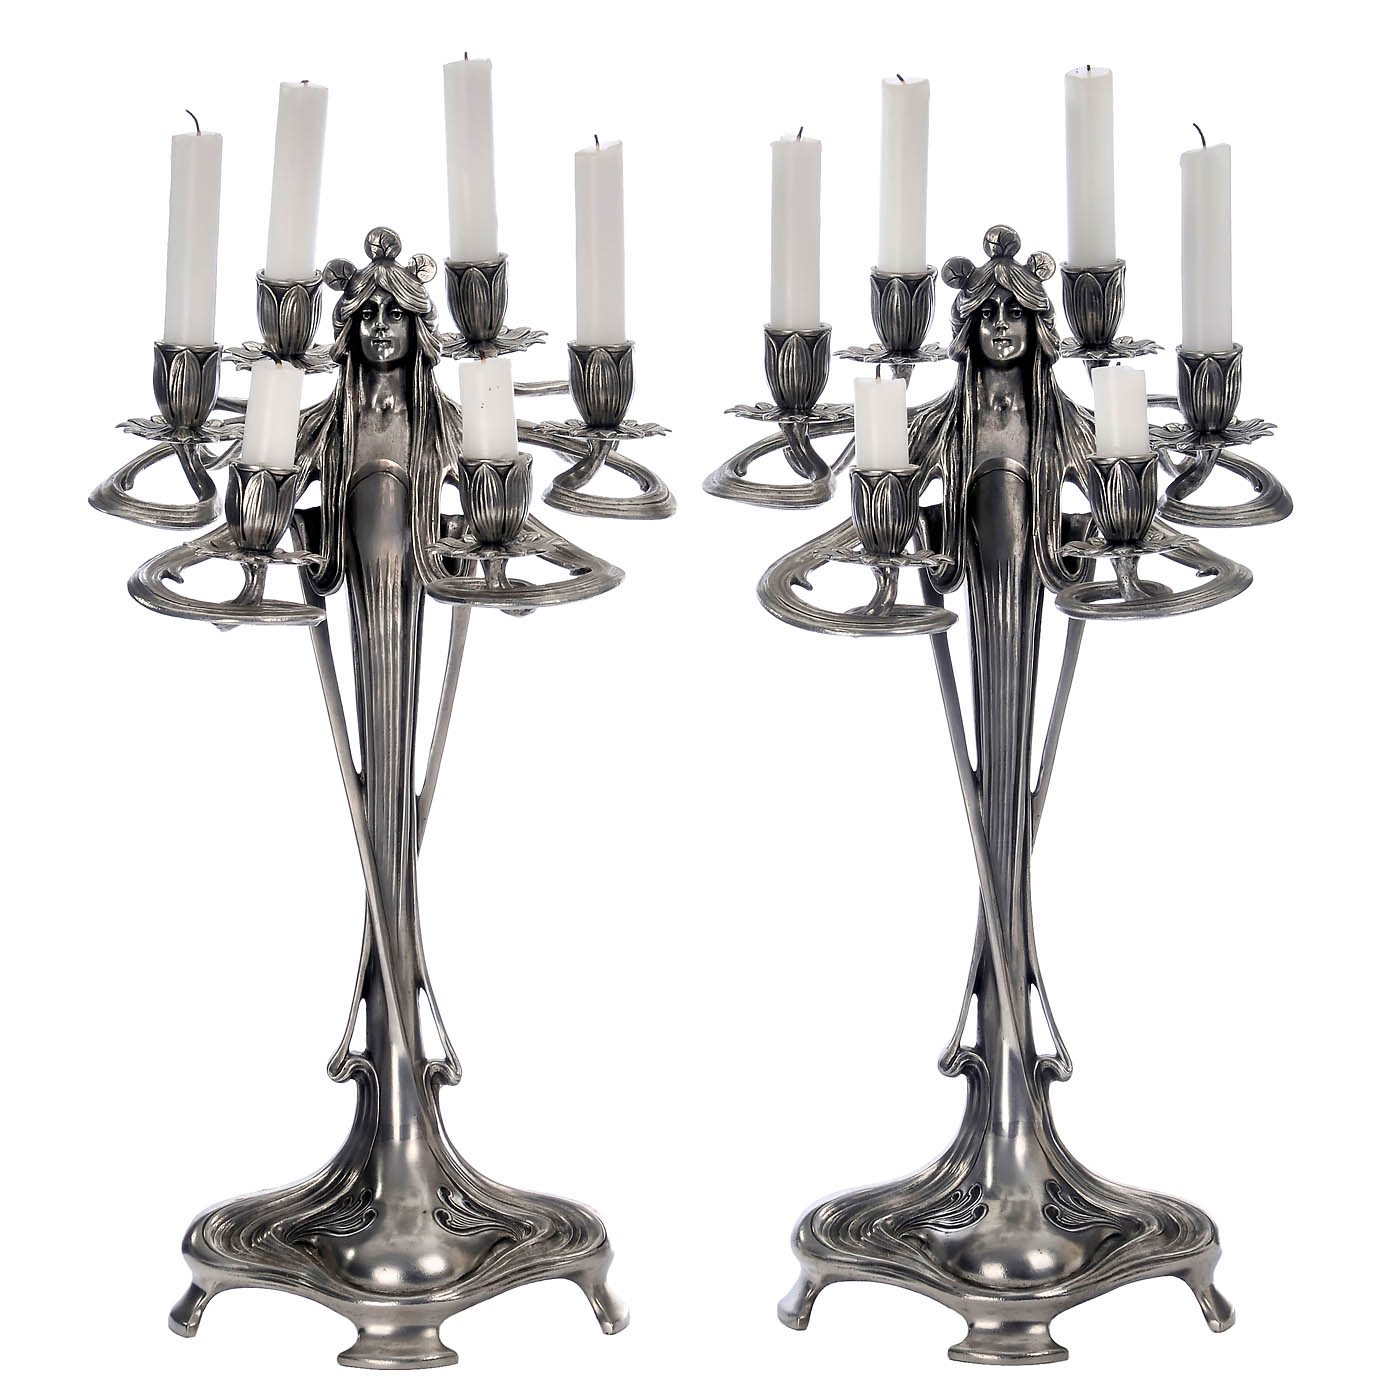 2 Art-Nouveau-Style Candle Holders and 4 Table Lamps, c. 1990 - Image 5 of 5